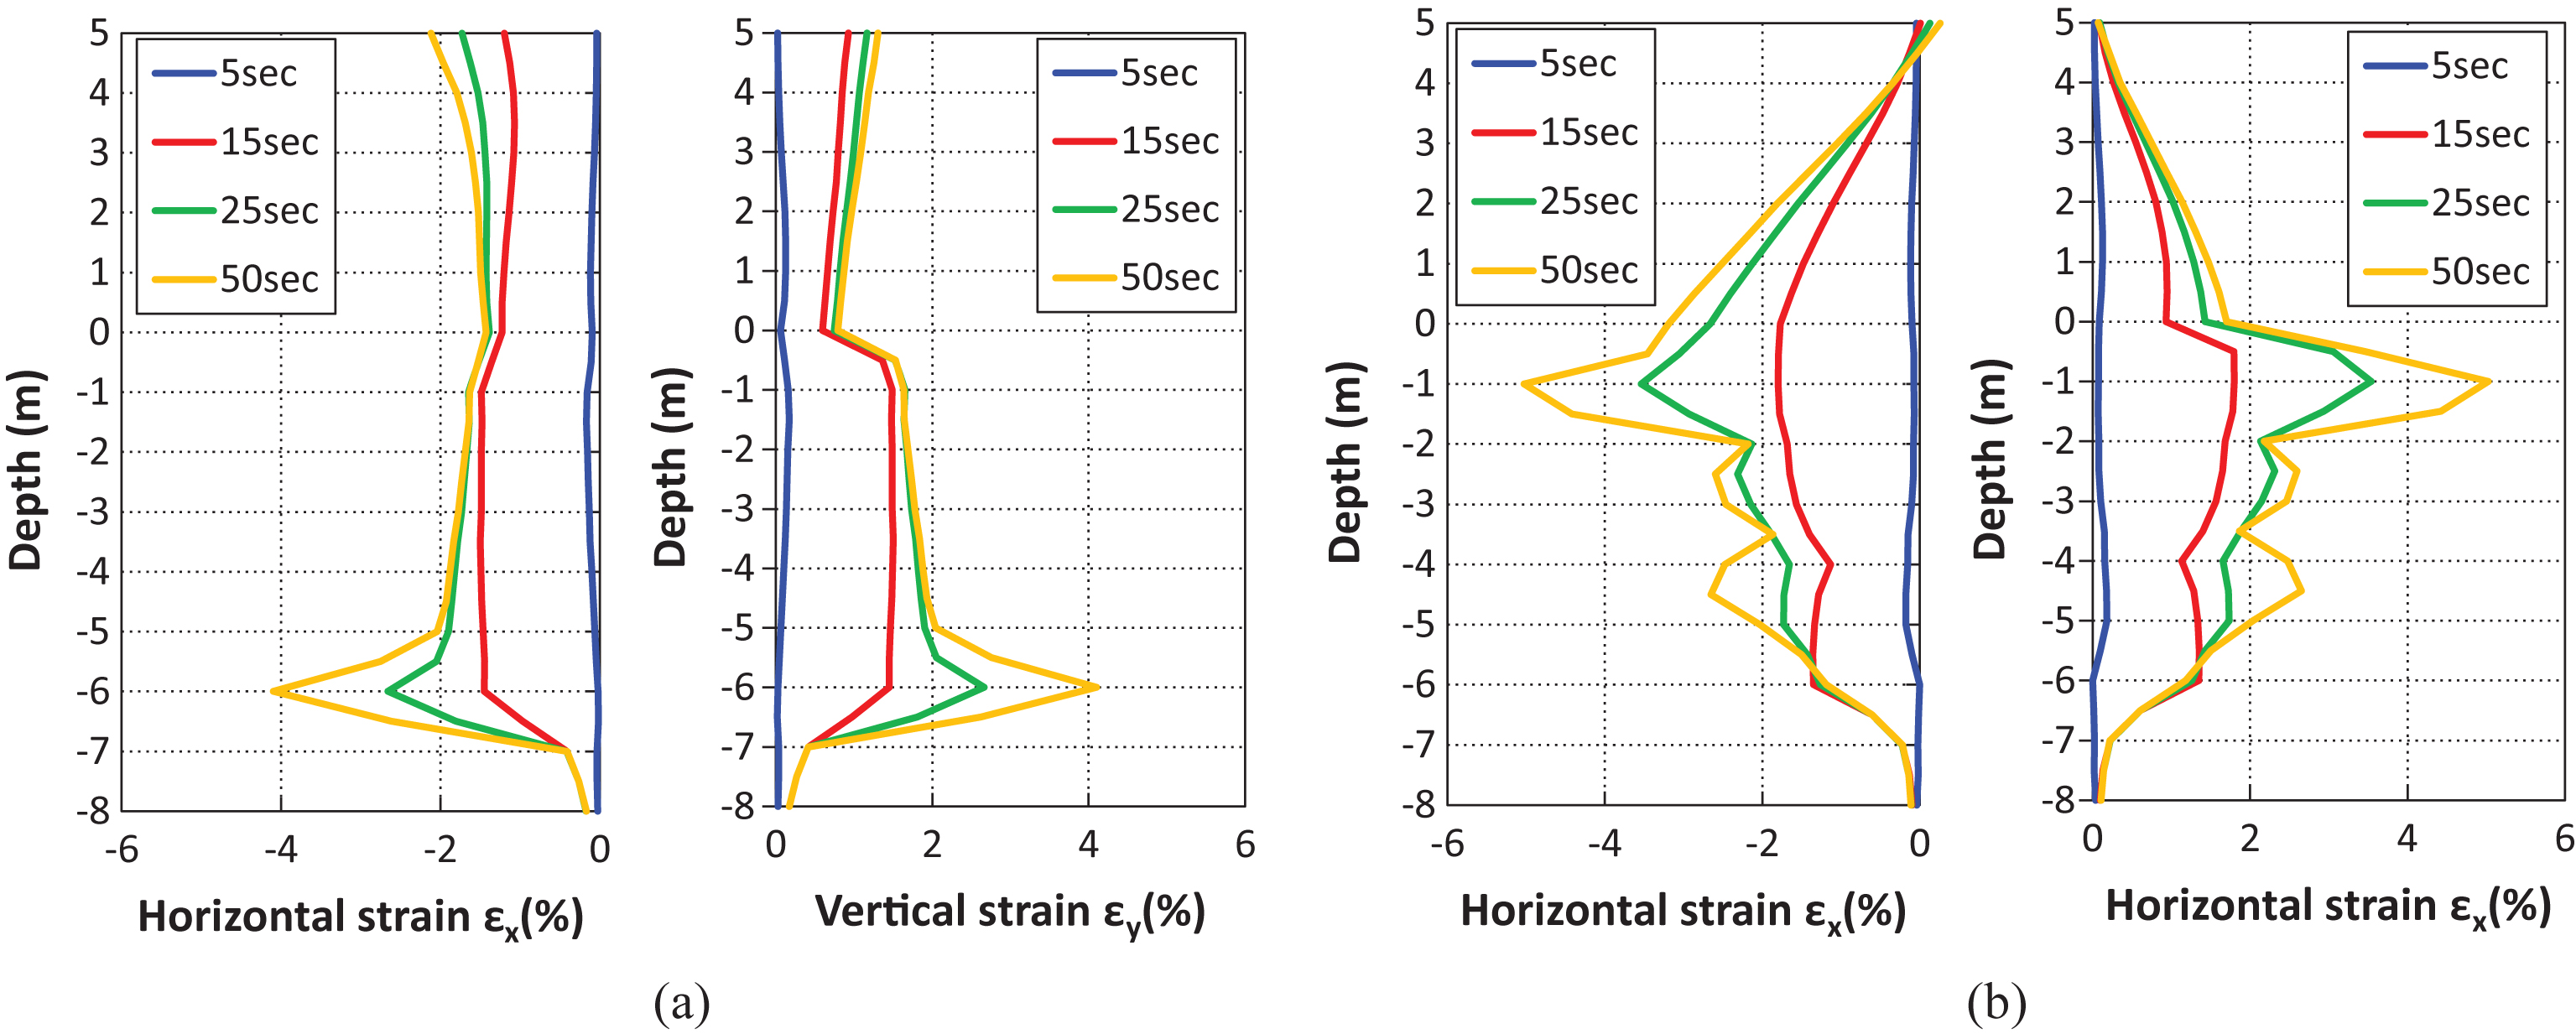 Horizontal and vertical strain distributions at center of embankment. (a) Side improvement (IW2W), (b) Valleyed improvement (IW3W).